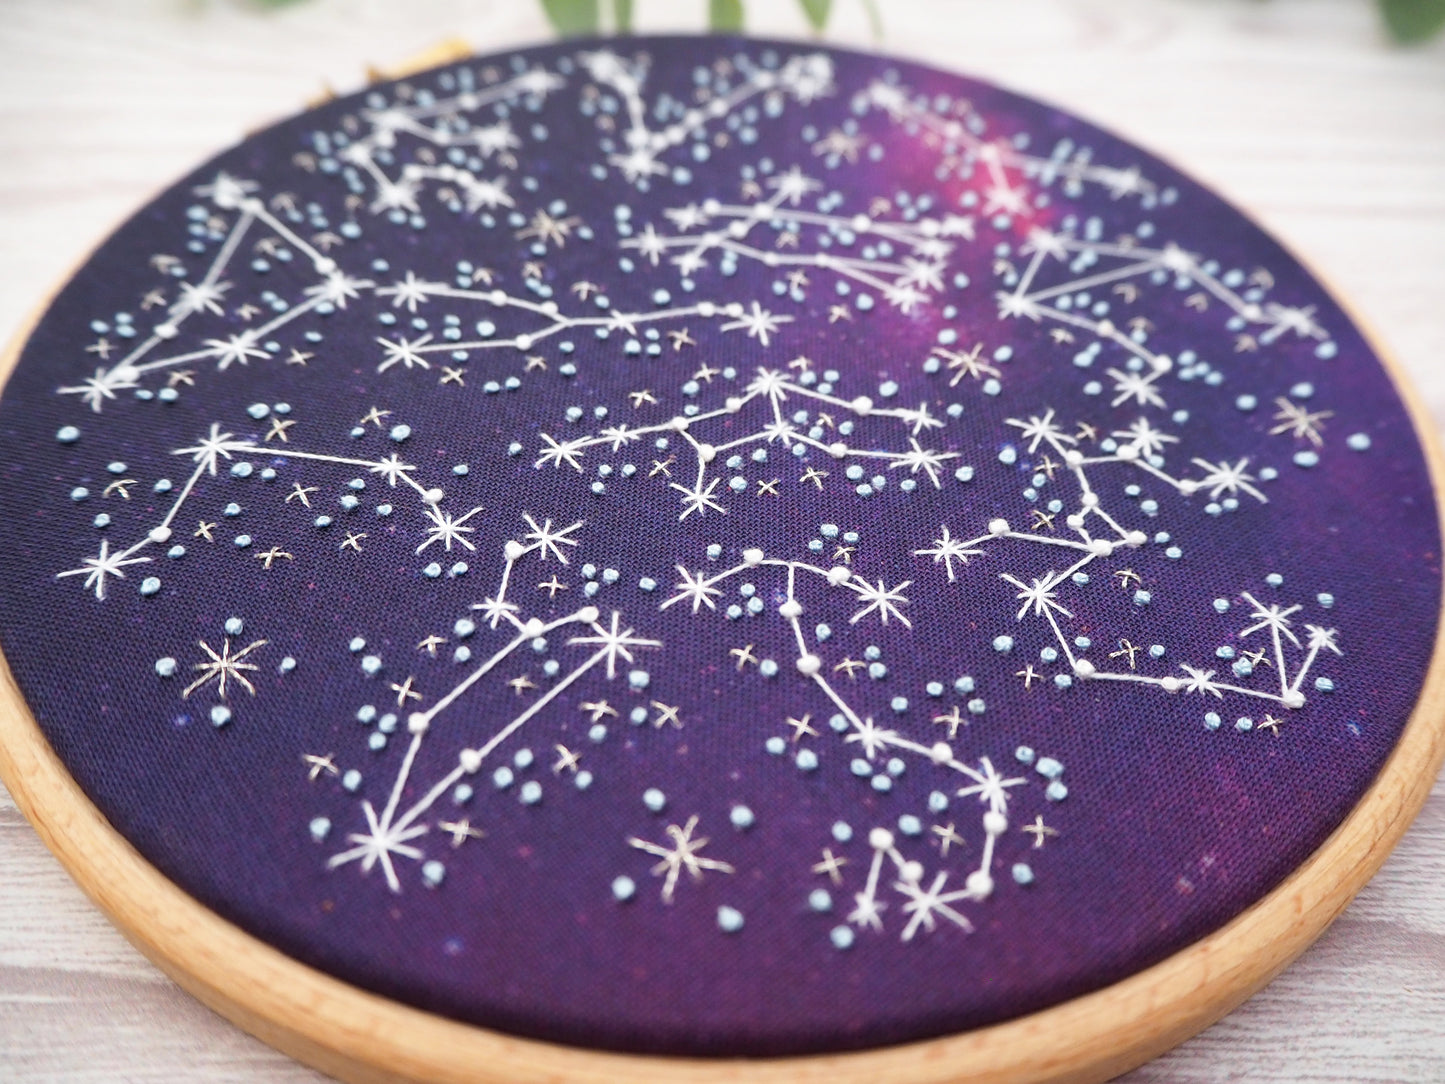 Astrology Embroidery Fabric Pack - Fabric Packs - ohsewbootiful